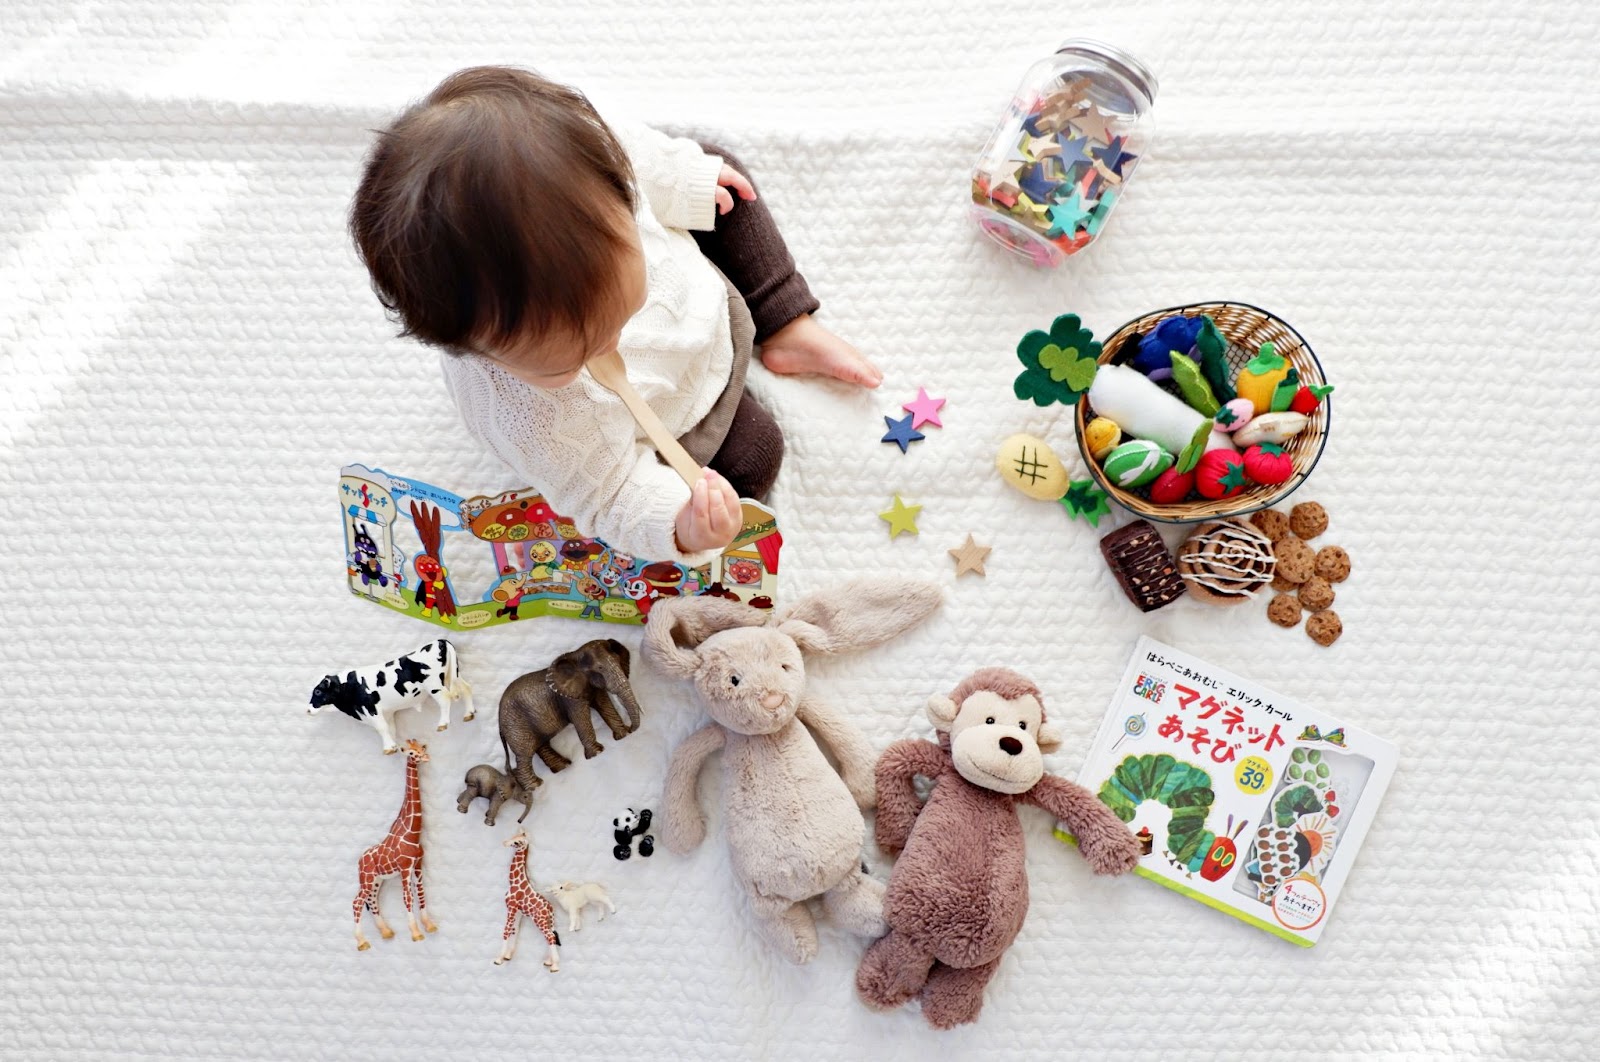 A baby sitting up surrounded by toys.